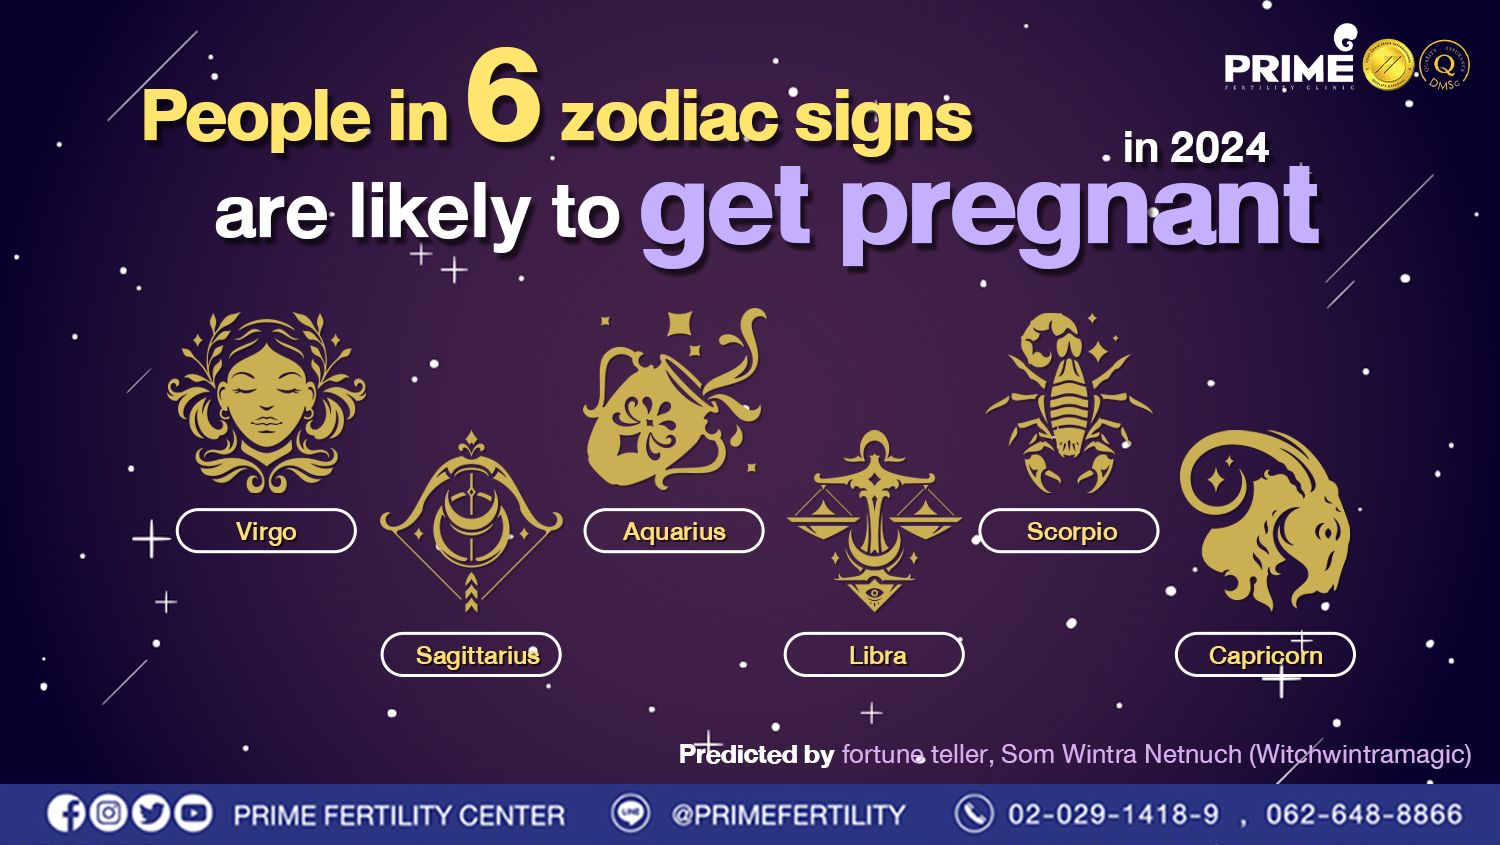 People in 6 zodiac signs are likely to get pregnant in 2024